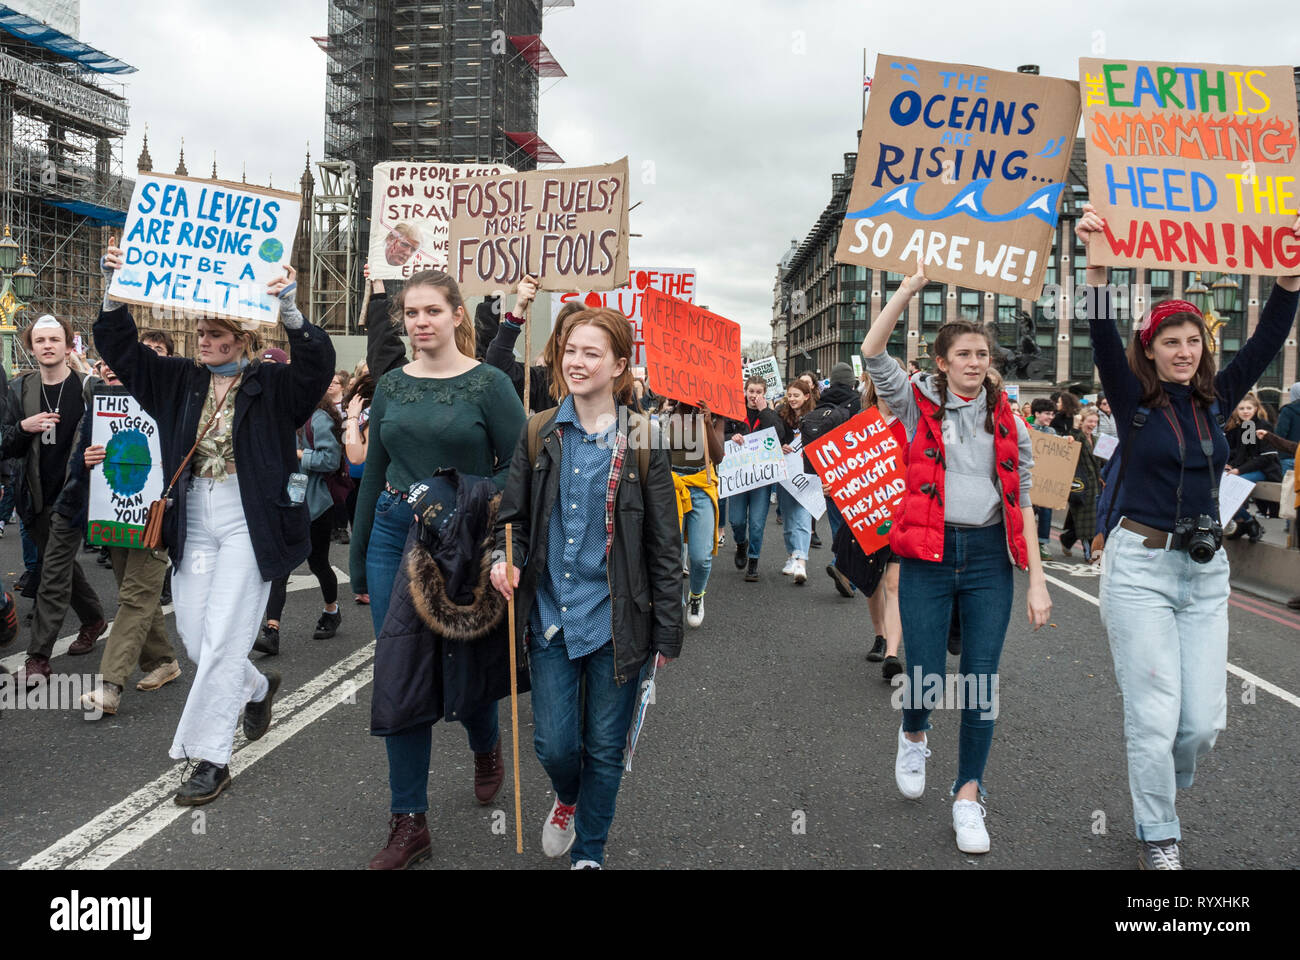 London, UK. 15th March, 2019. School students campaigning against climate change protest outside Parliament. Credit: Maggie sully/Alamy Live News. School children on strike, part of the 'FridaysforFuture'protest against climate change march over Westminster bridge, outside Parliament, London. In the foreground five young women students carry colourful homemade banners 'Oceans are rising, so are we', 'Fossil fuels? More like fossil fools', 'Sea levels are rising, don't be a melt' and 'The earth is warming, heed the warning'. Stock Photo